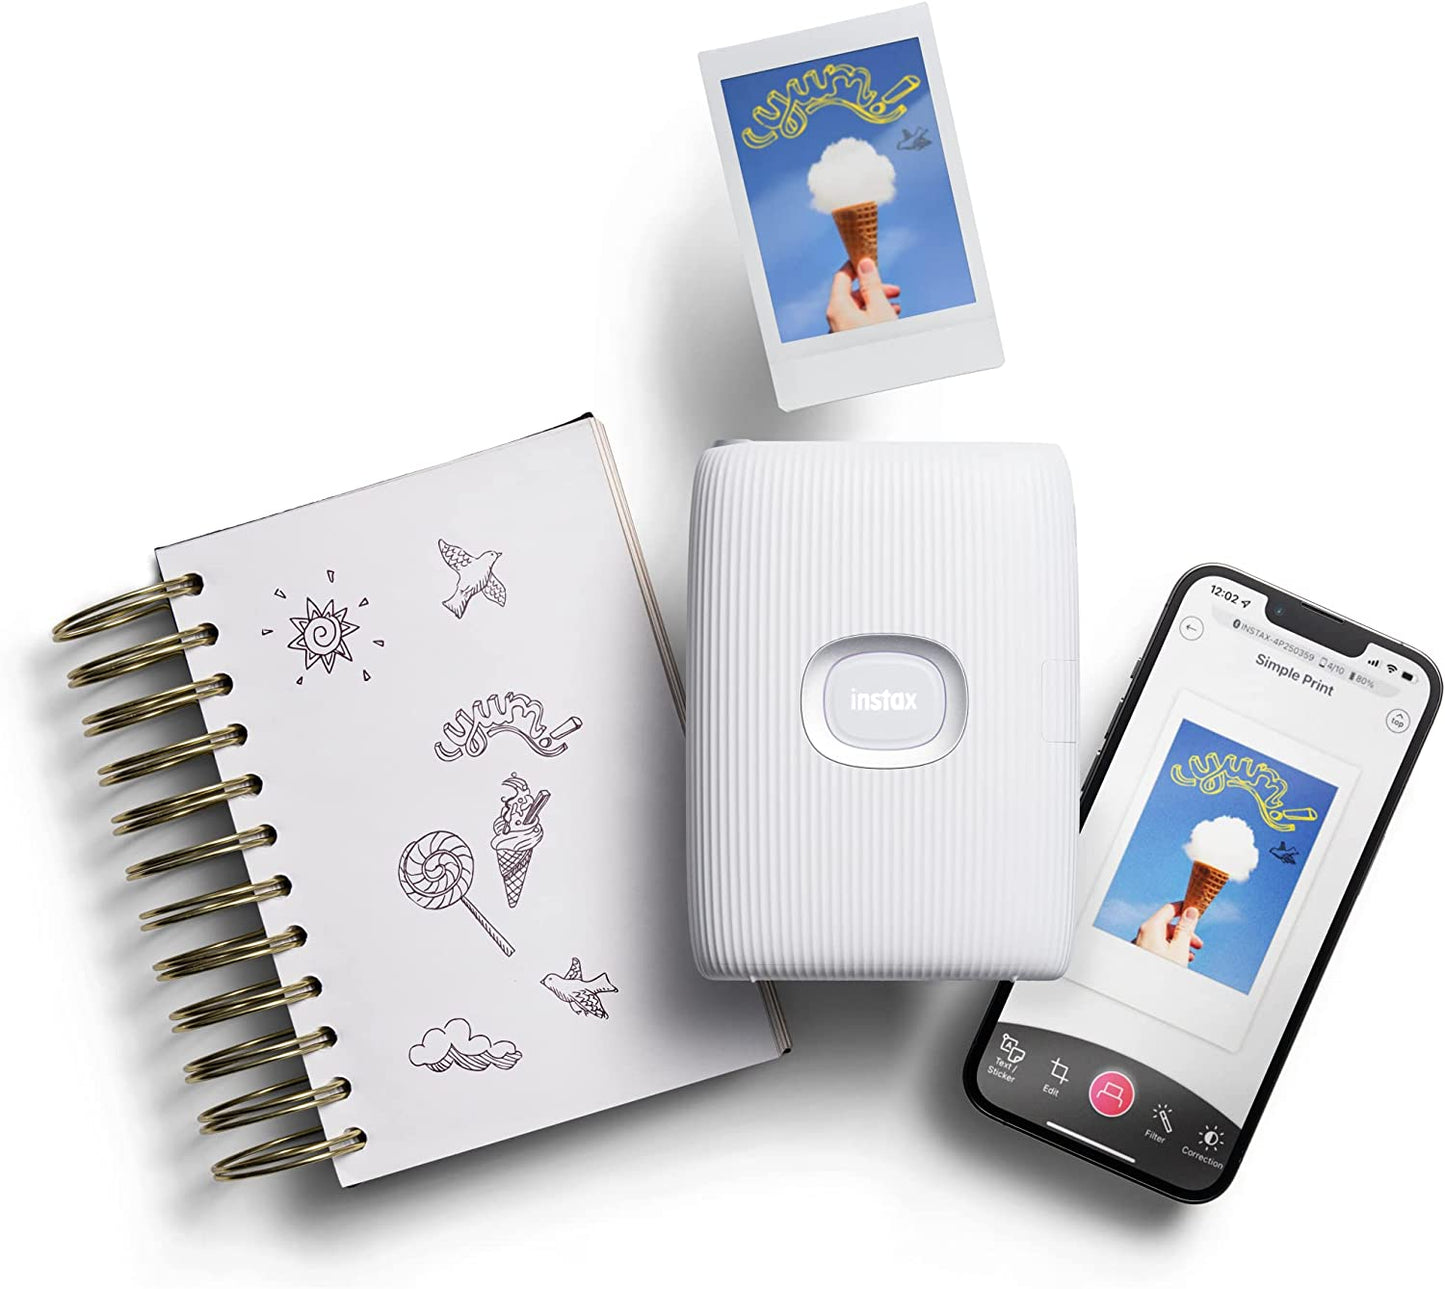 A Bluetooth smartphone printer by Instax sitting next to a smartphone. There is a printed photo of an ice cream as well as a journal with some doodles 